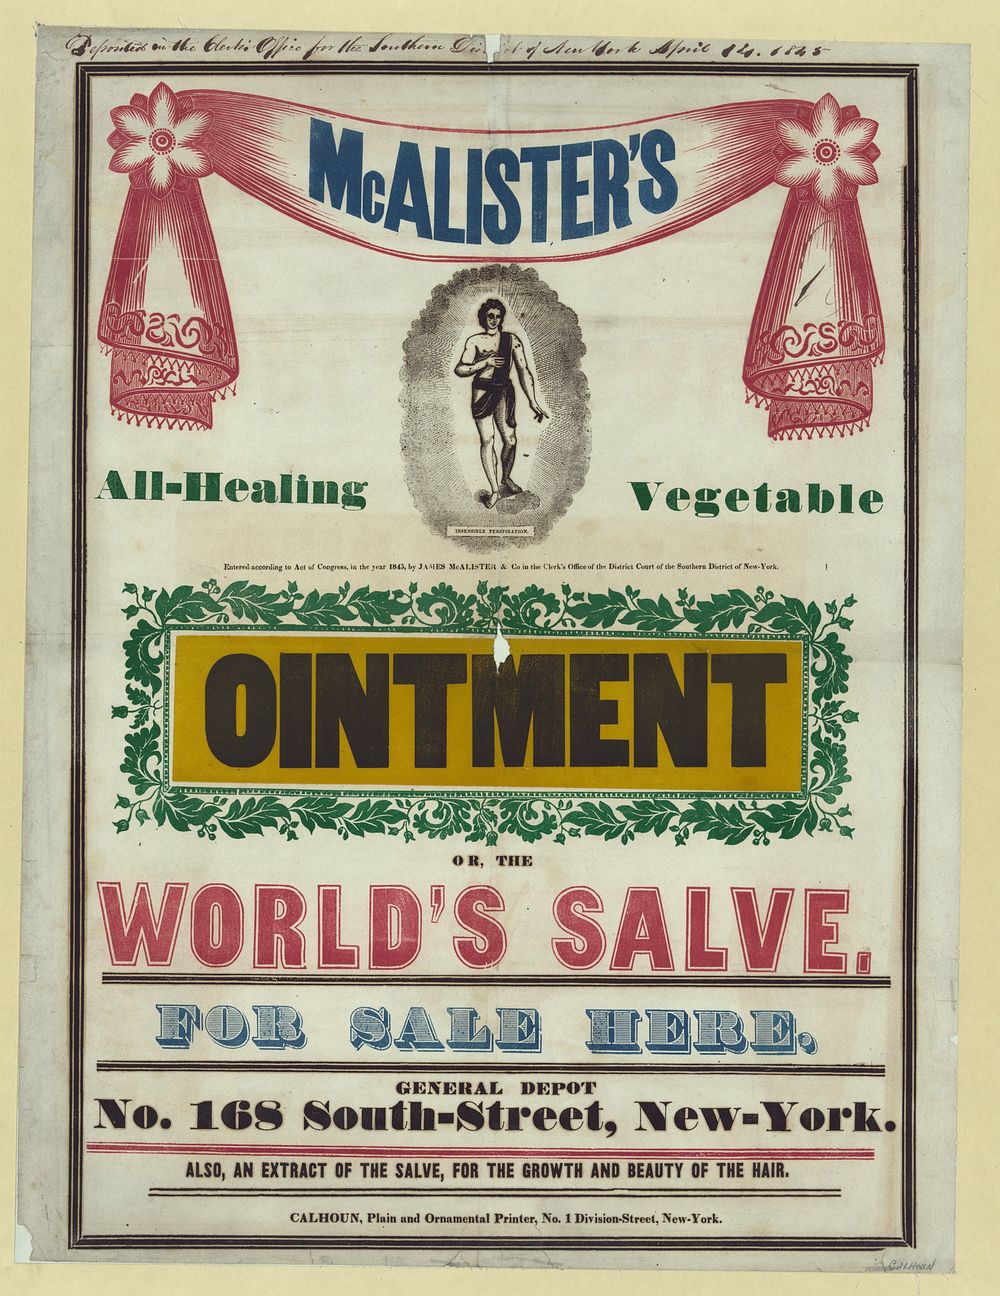 McAlister's all-healing vegetable ointment ...